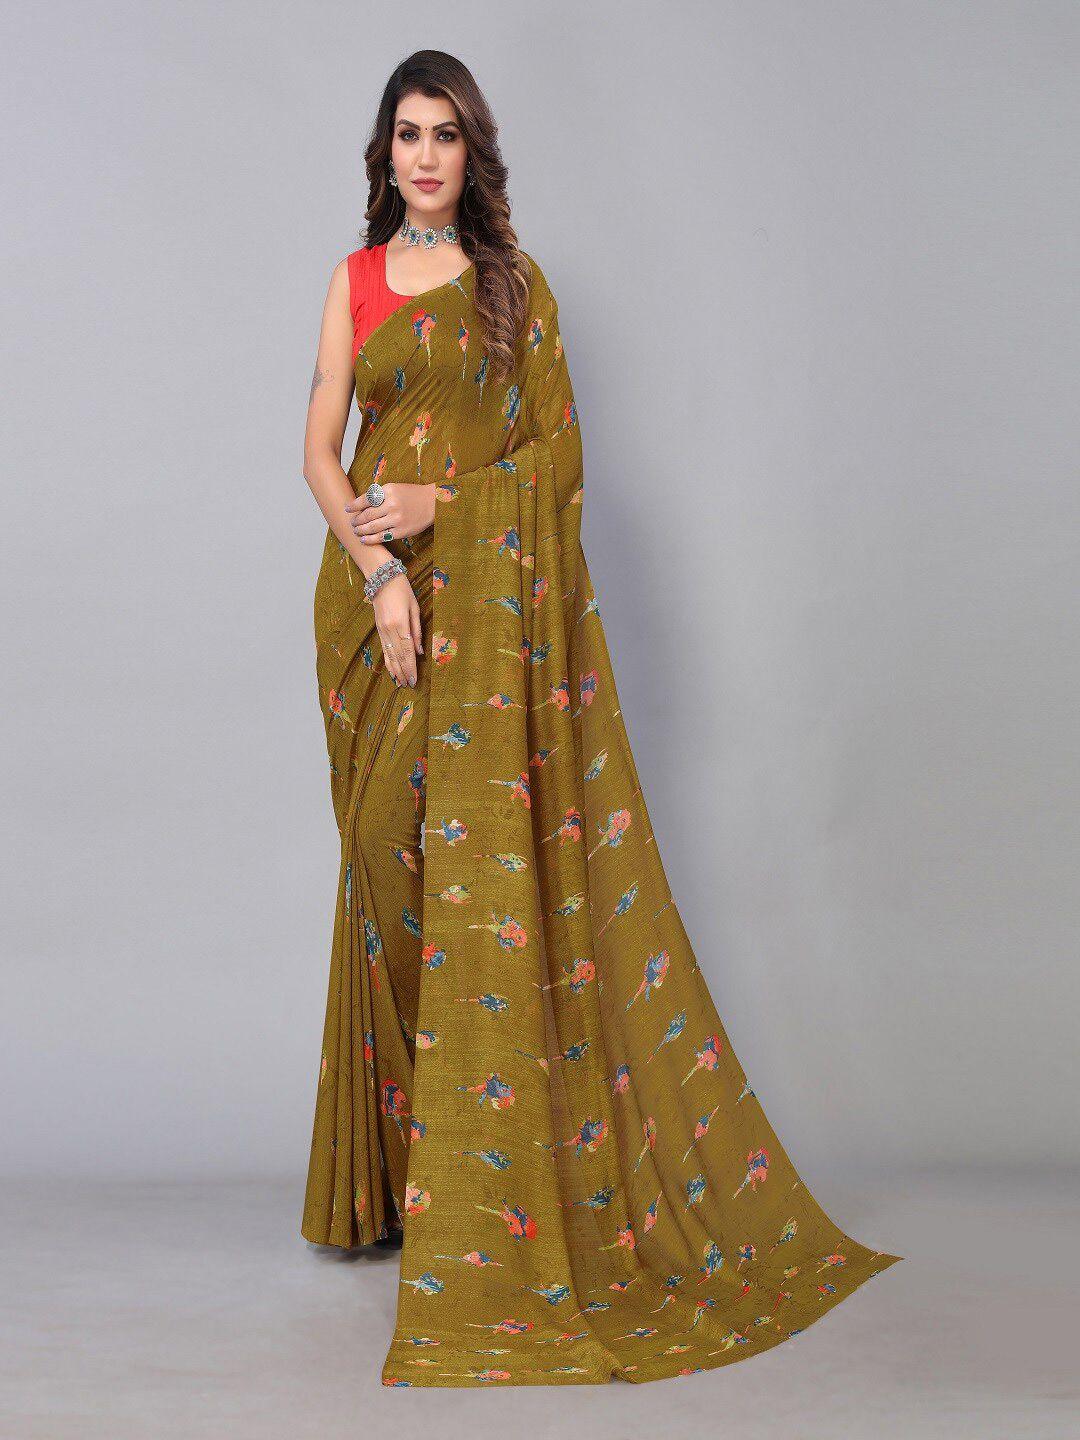 hritika olive green & red floral pure georgette saree